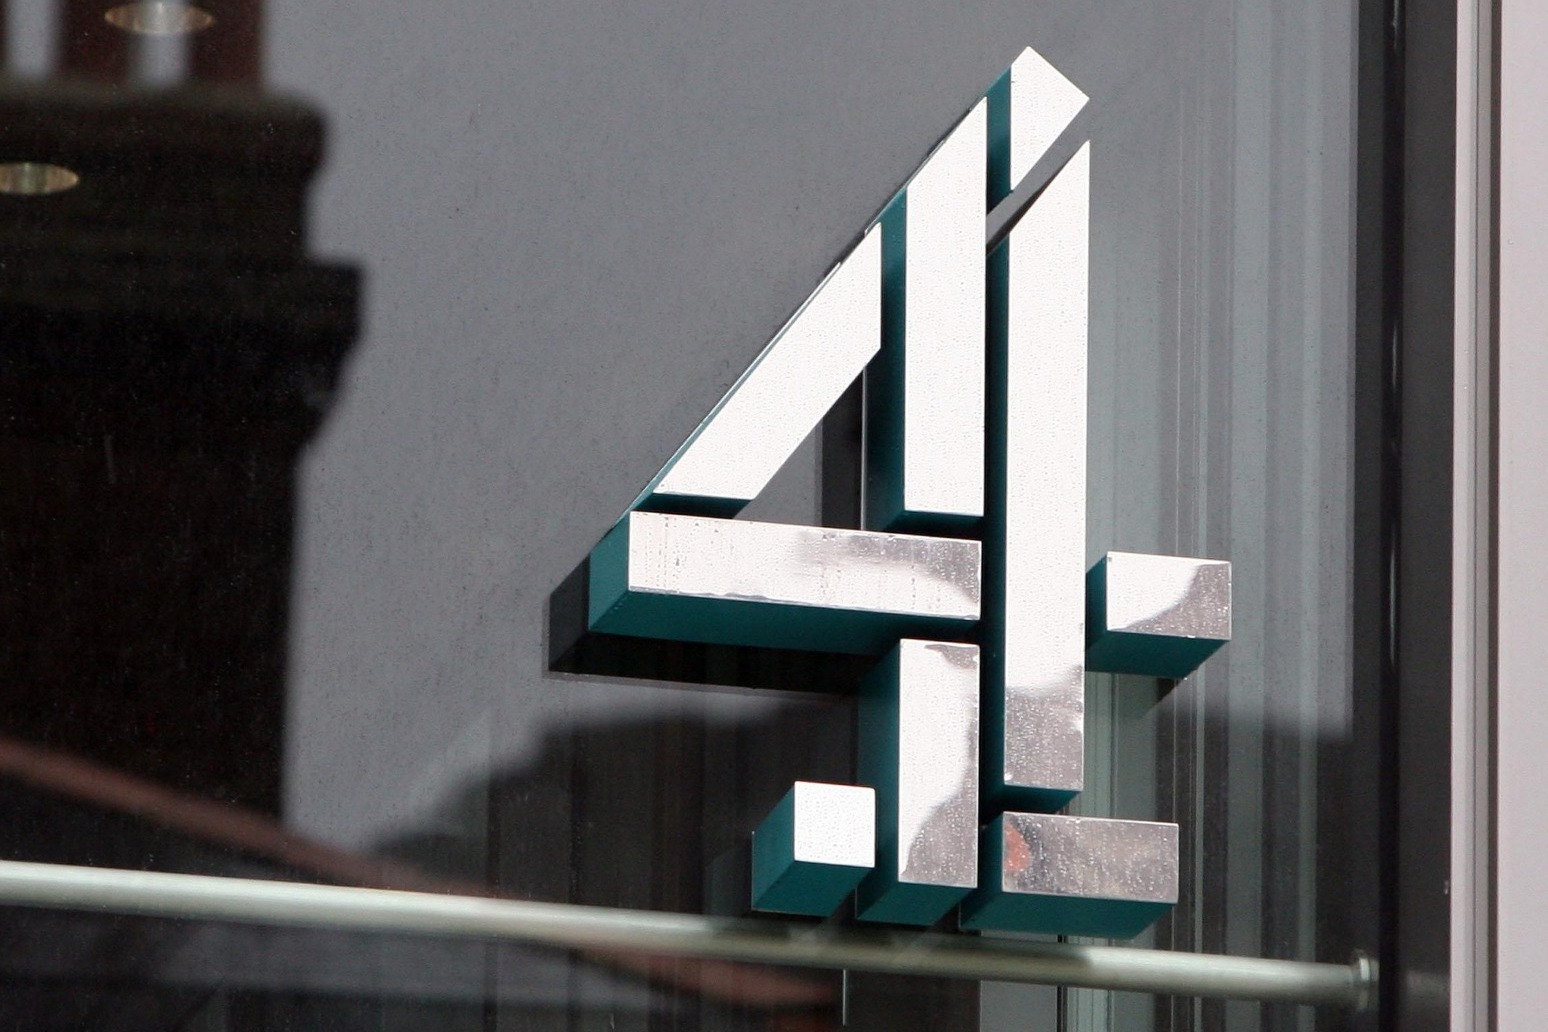 Culture Secretary confirms decision not to sell Channel 4 